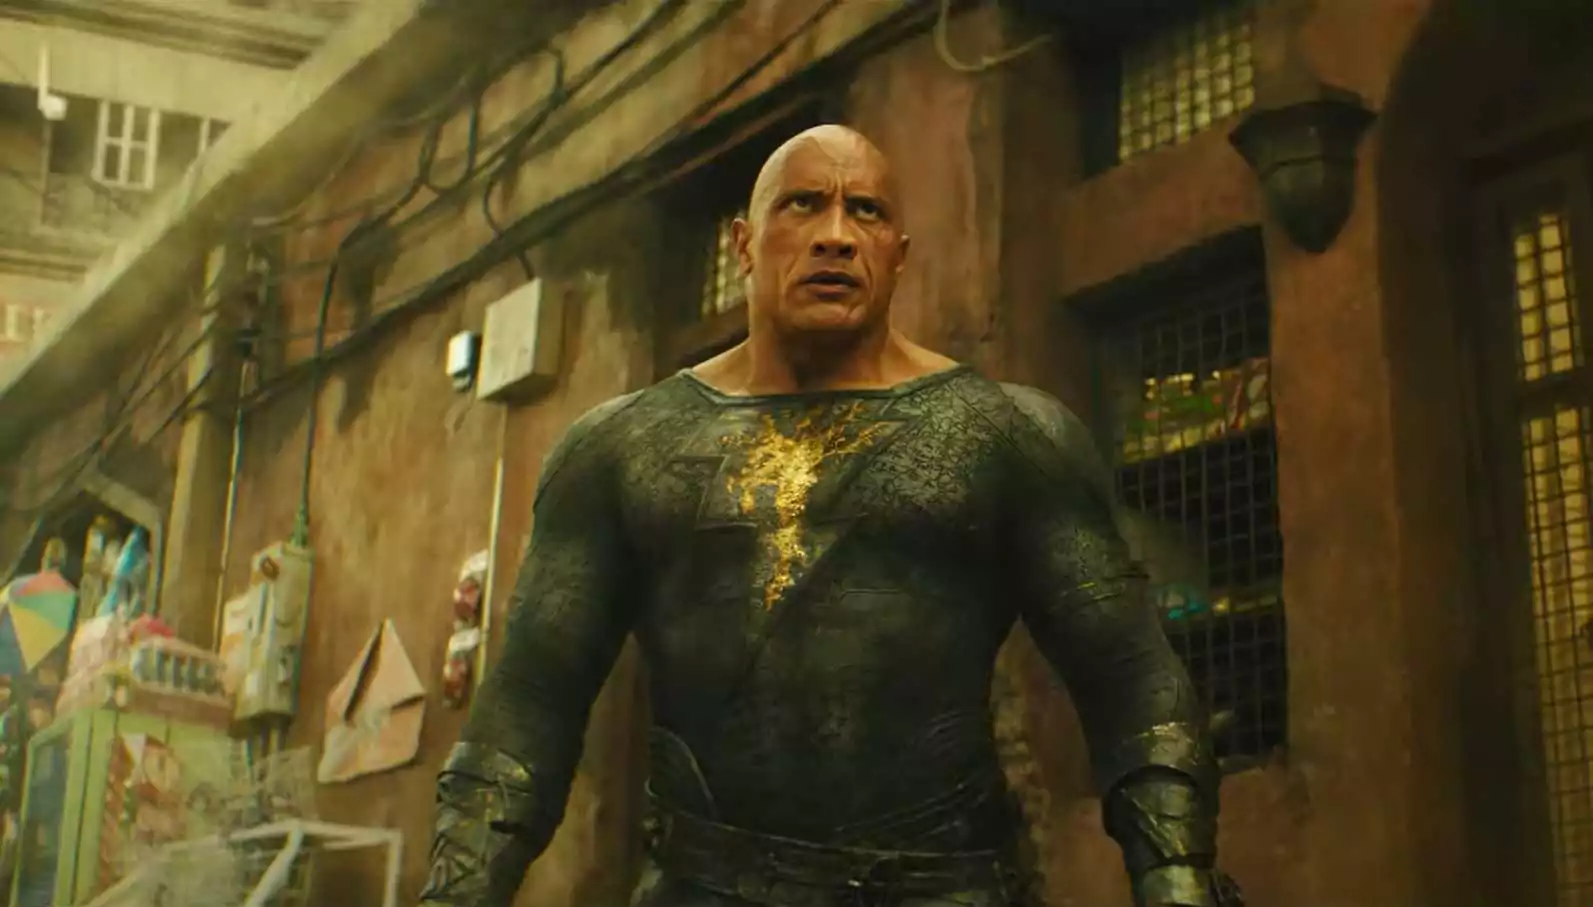 The World Needs Heroes. - The Rock (Black Adam) Images Photos wallpapers